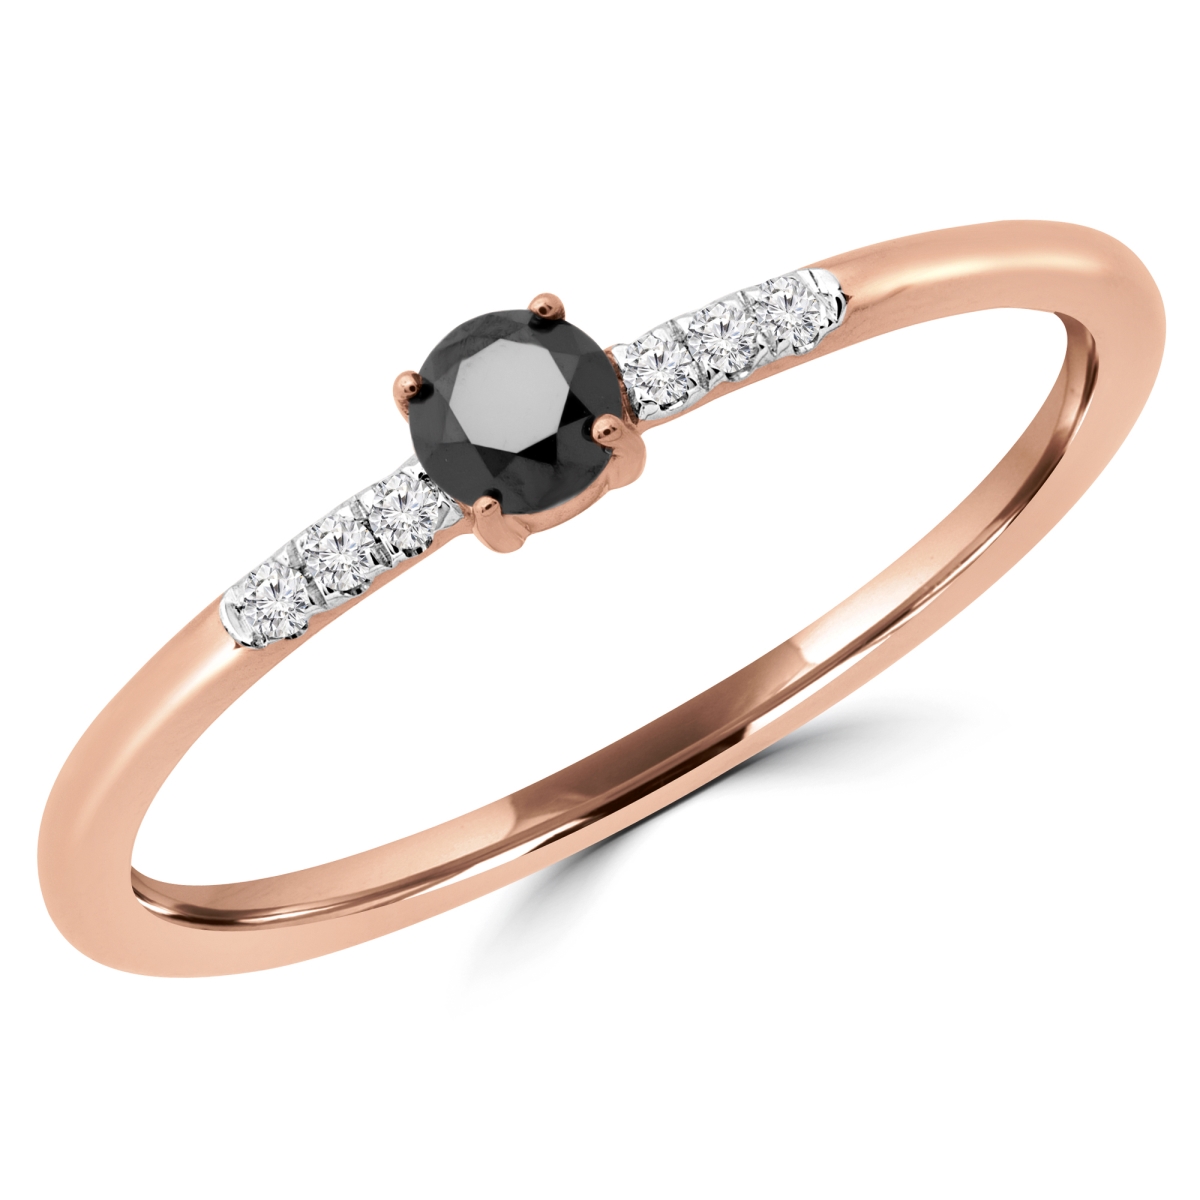 Picture of Majesty Diamonds MDR190079-3.75 0.16 CTW Round Black Diamond Bezel Set Cocktail Ring in 14K Rose Gold - Size 3.75